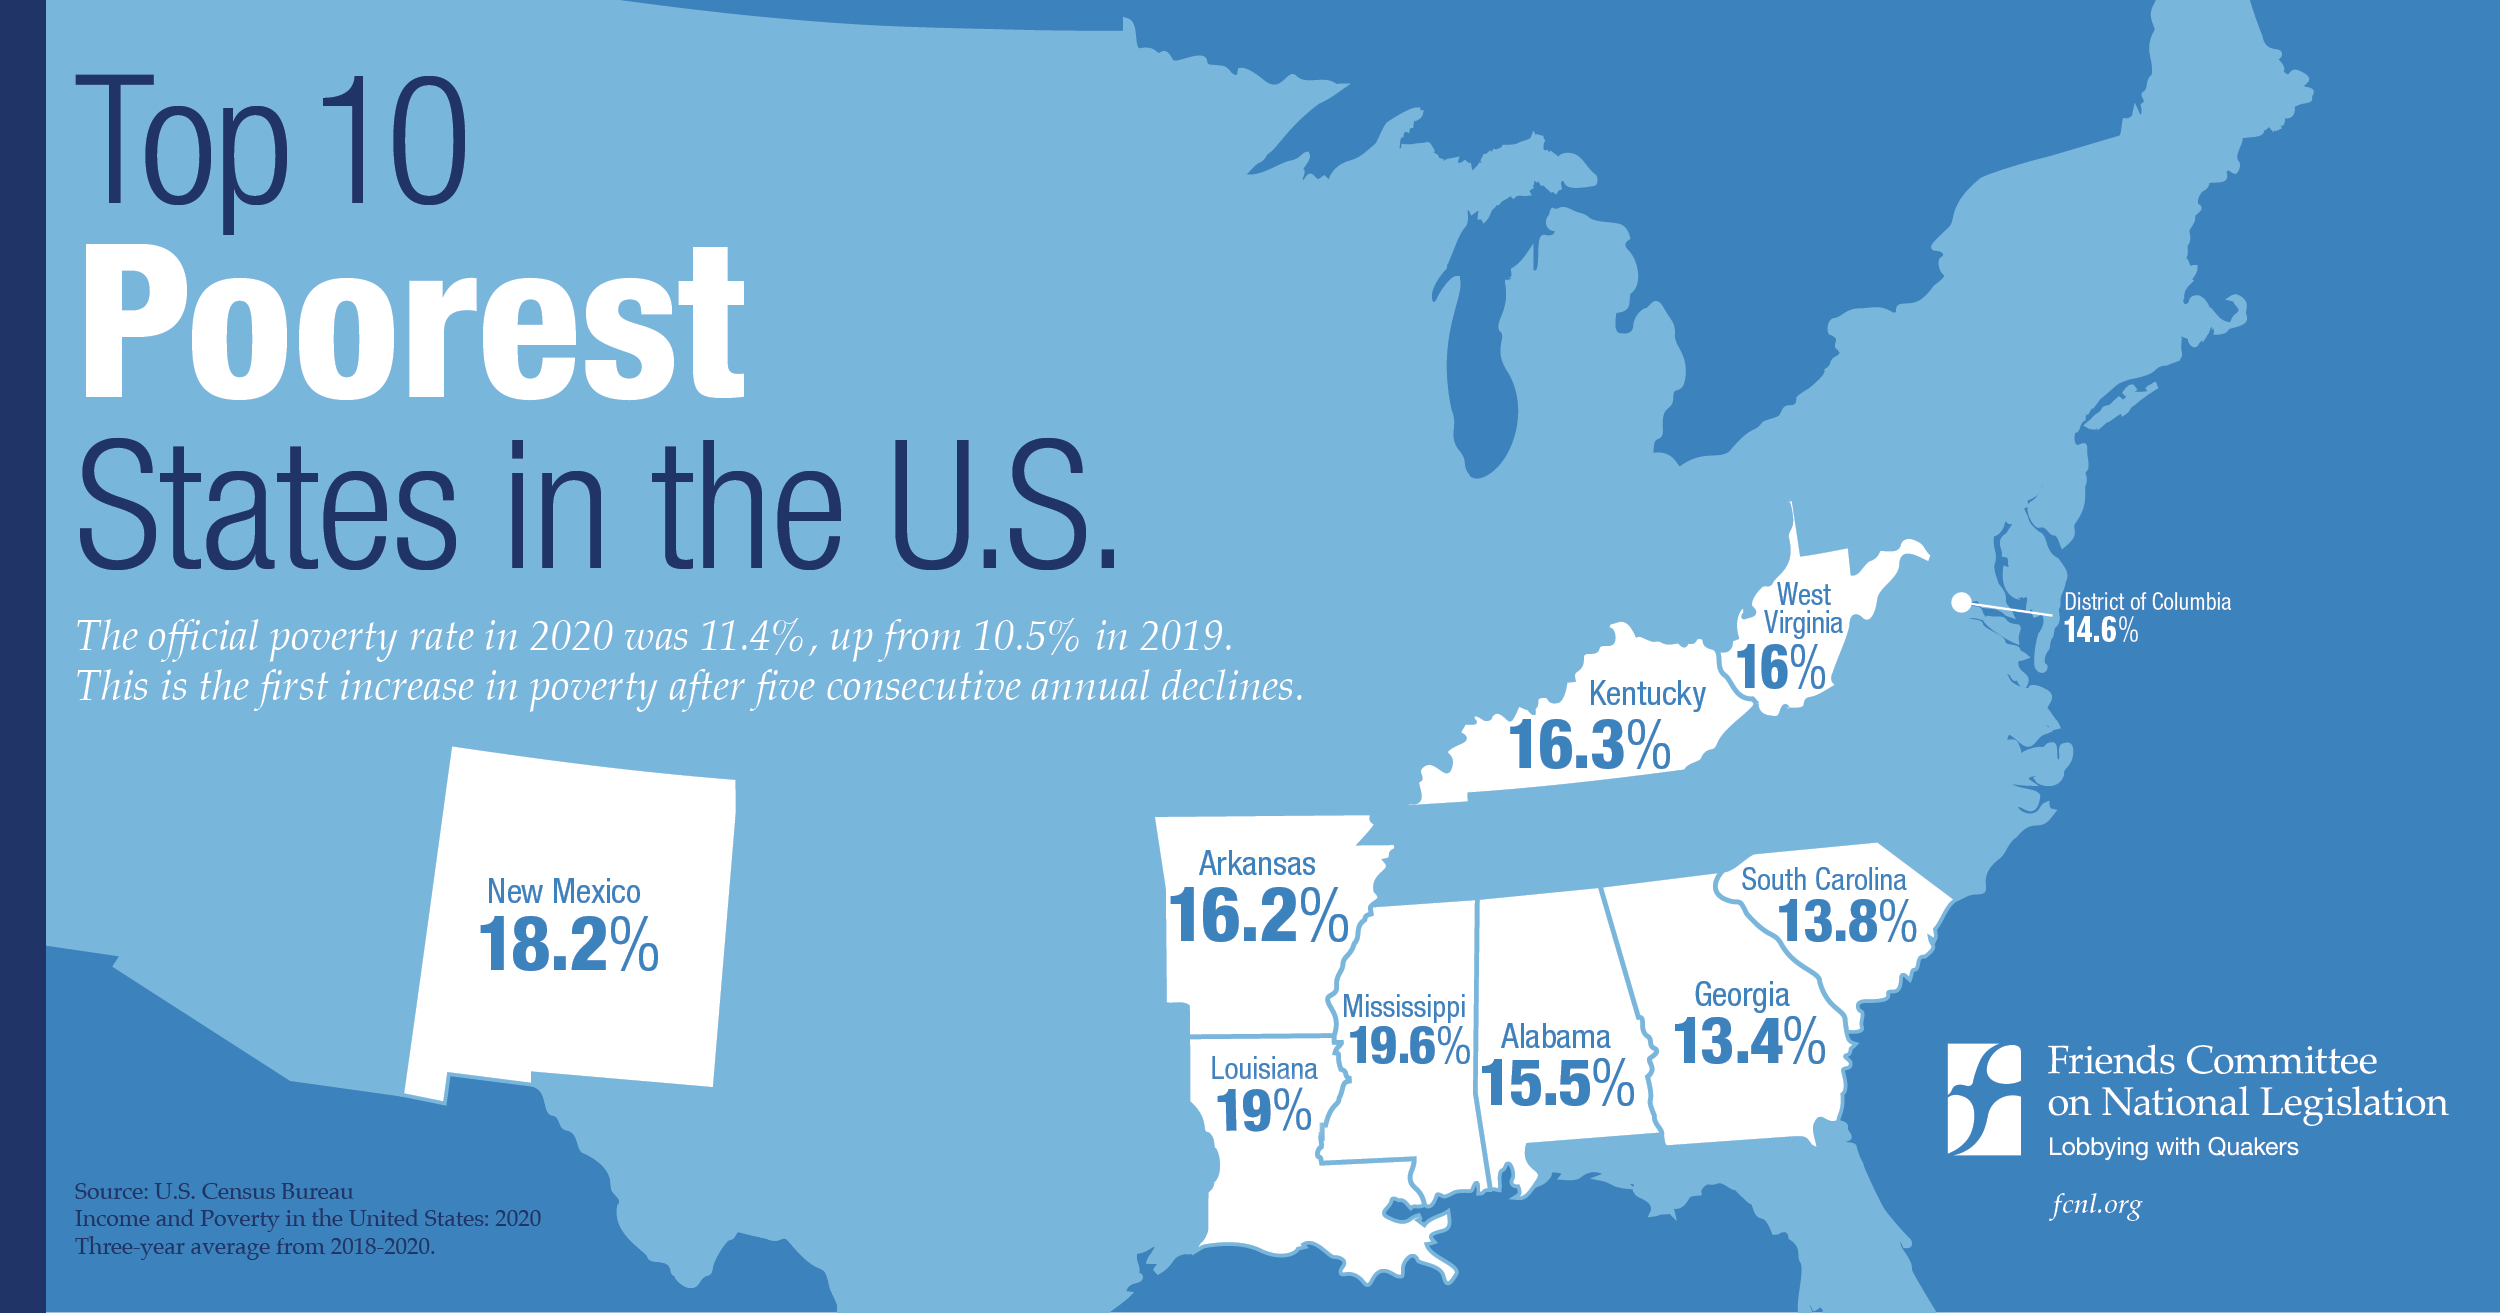 Graphic of the 10 poorest states in the U.S.